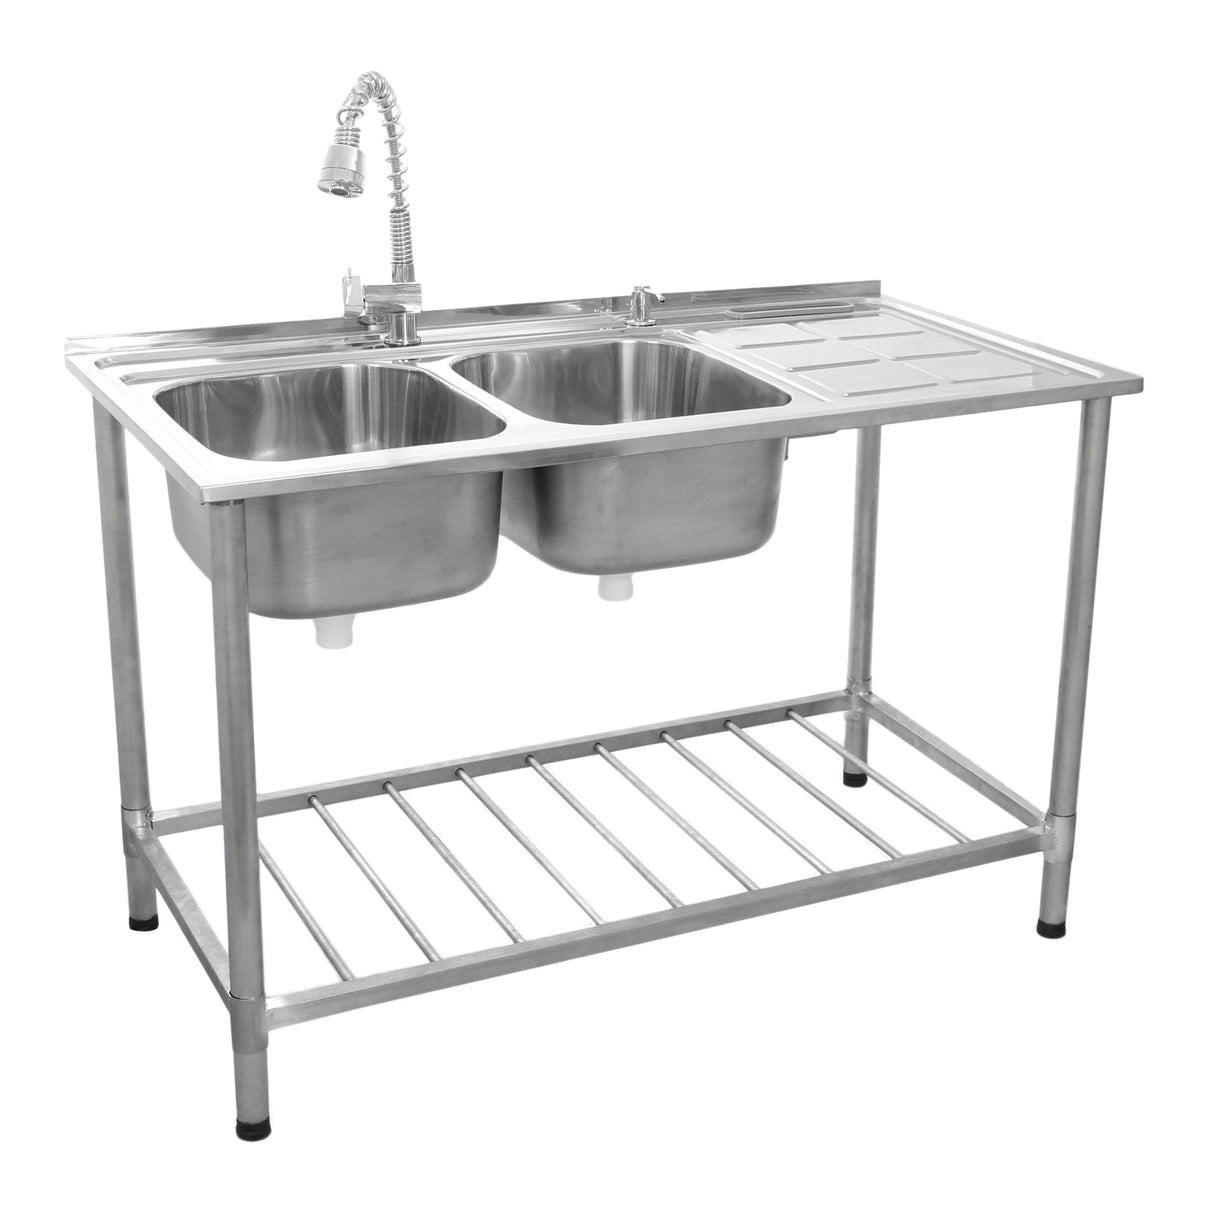 KuKoo Commercial Catering Sink Double Bowl / Right Hand Drainer